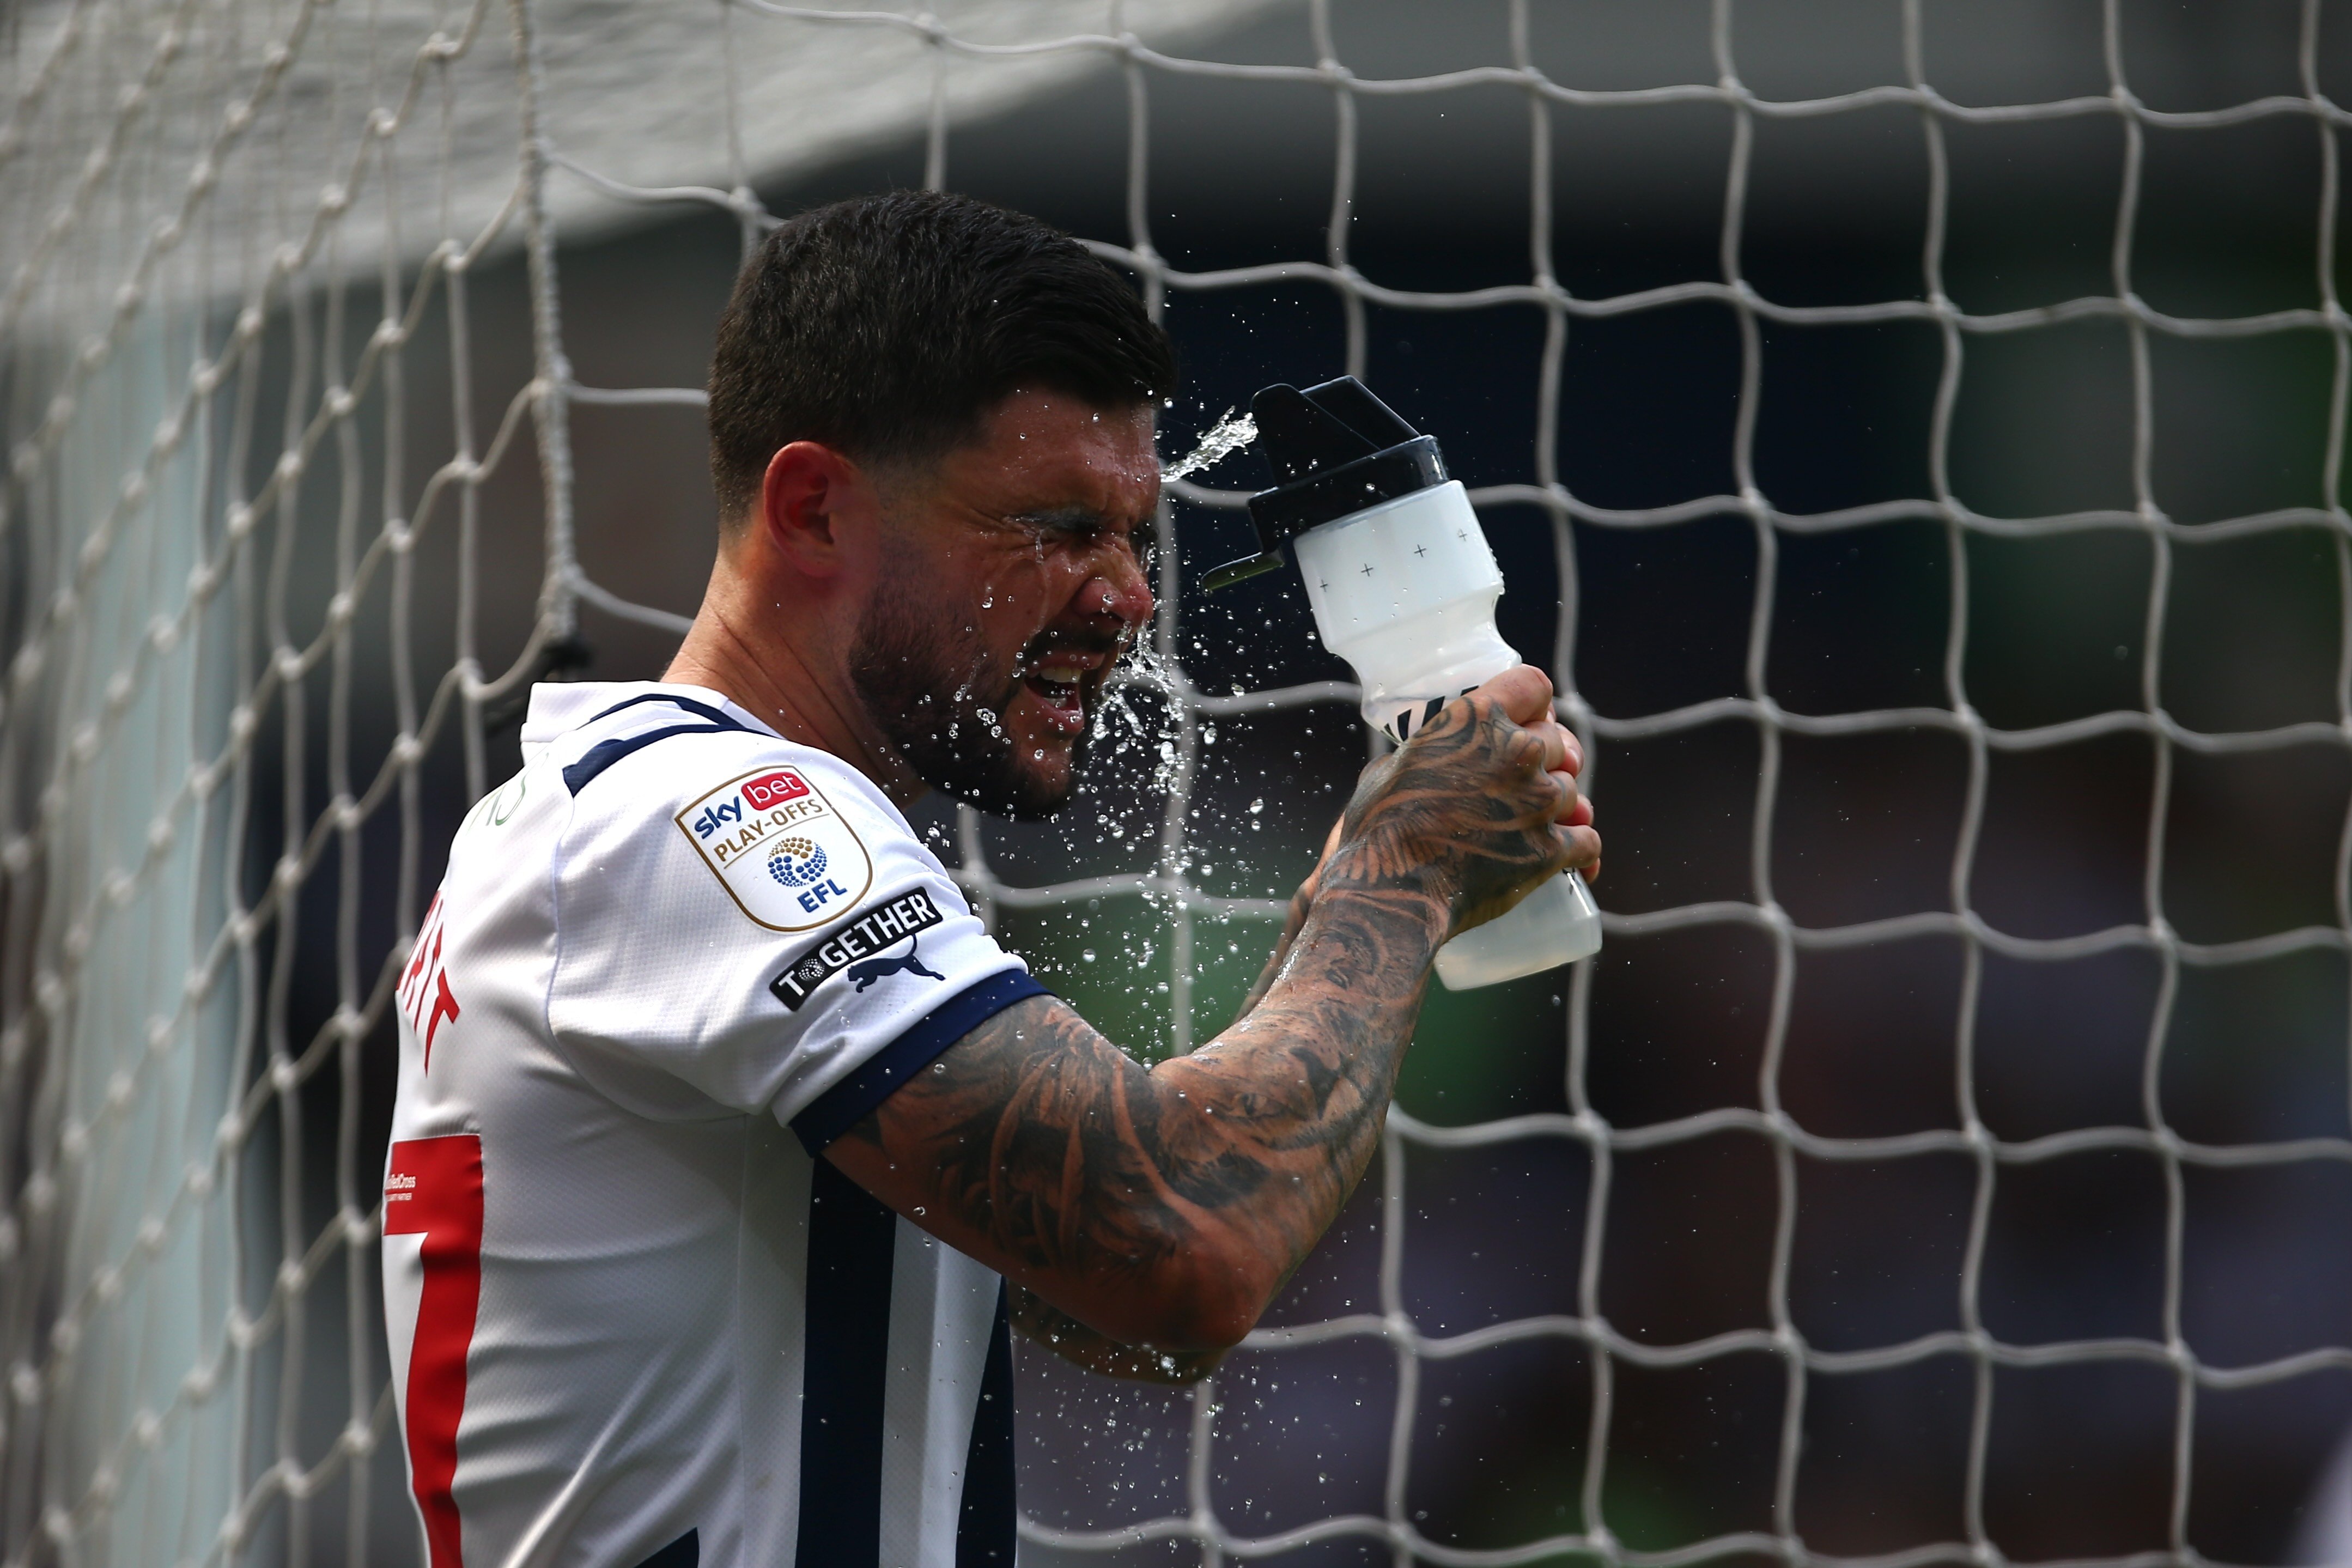 Alex Mowatt squirts water in his face at The Hawthorns against Southampton 